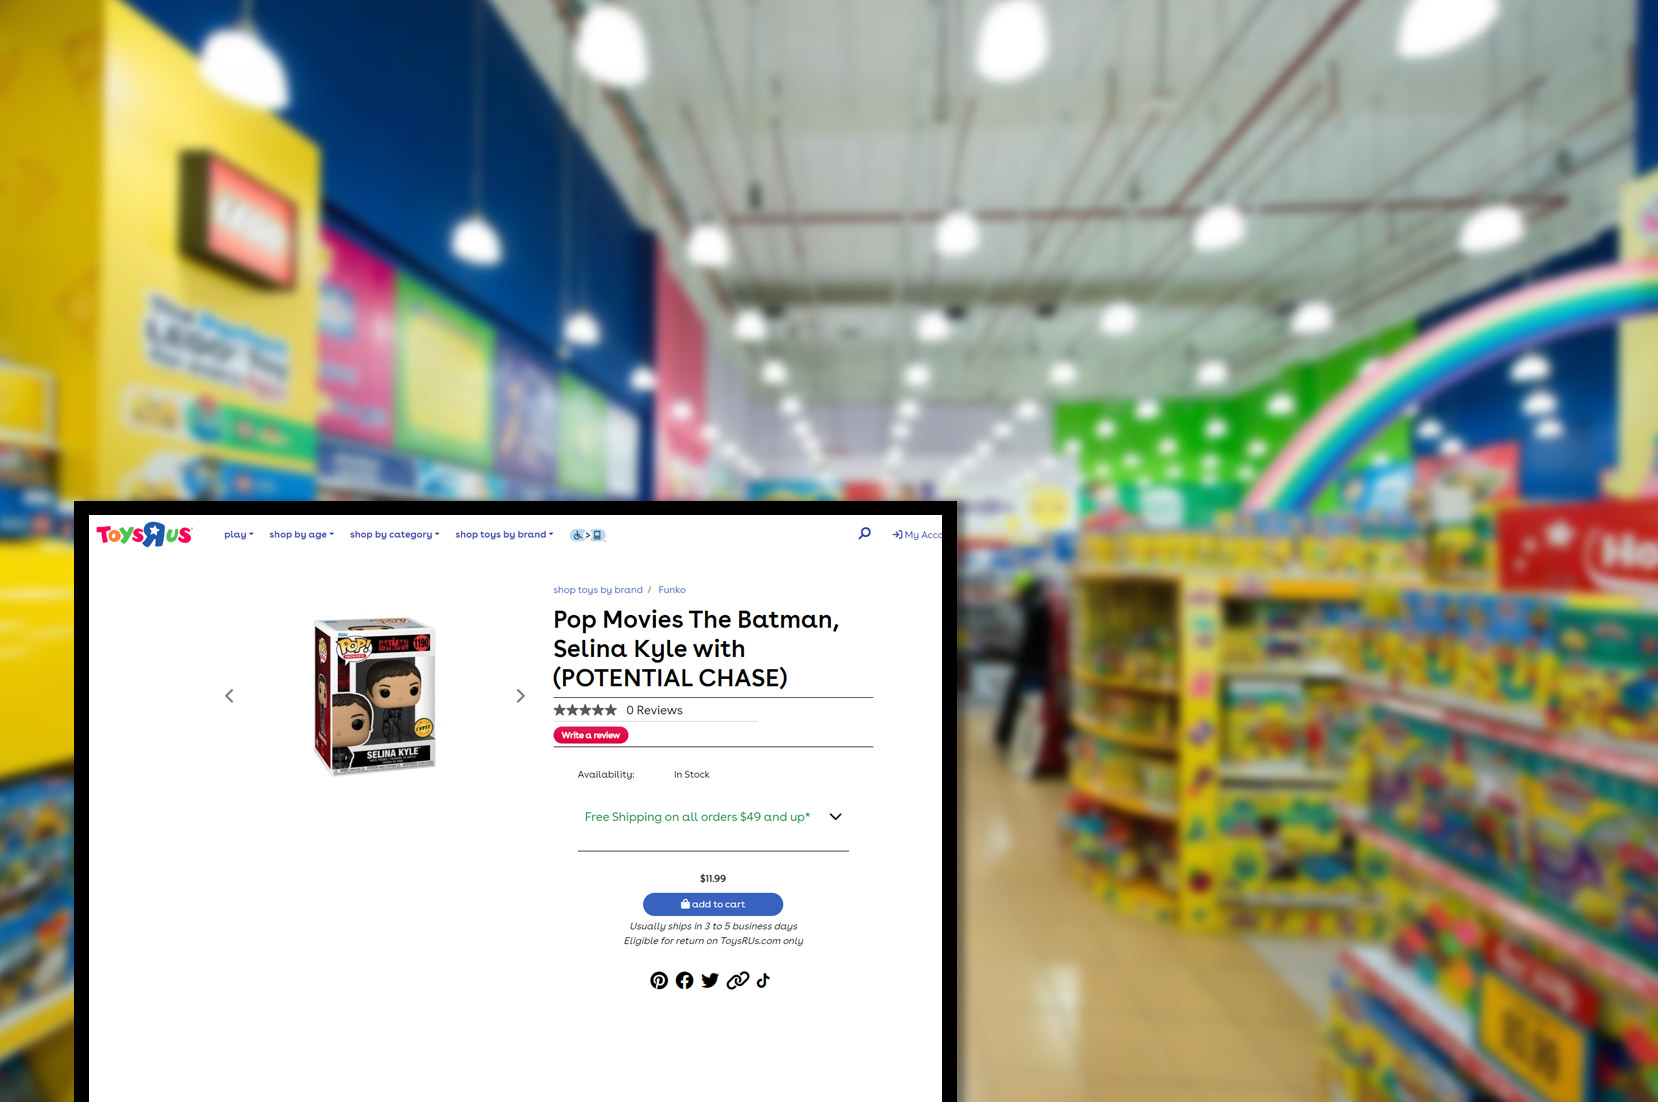 toysrus-comproduct-pricing-information-and-image-scraping-services